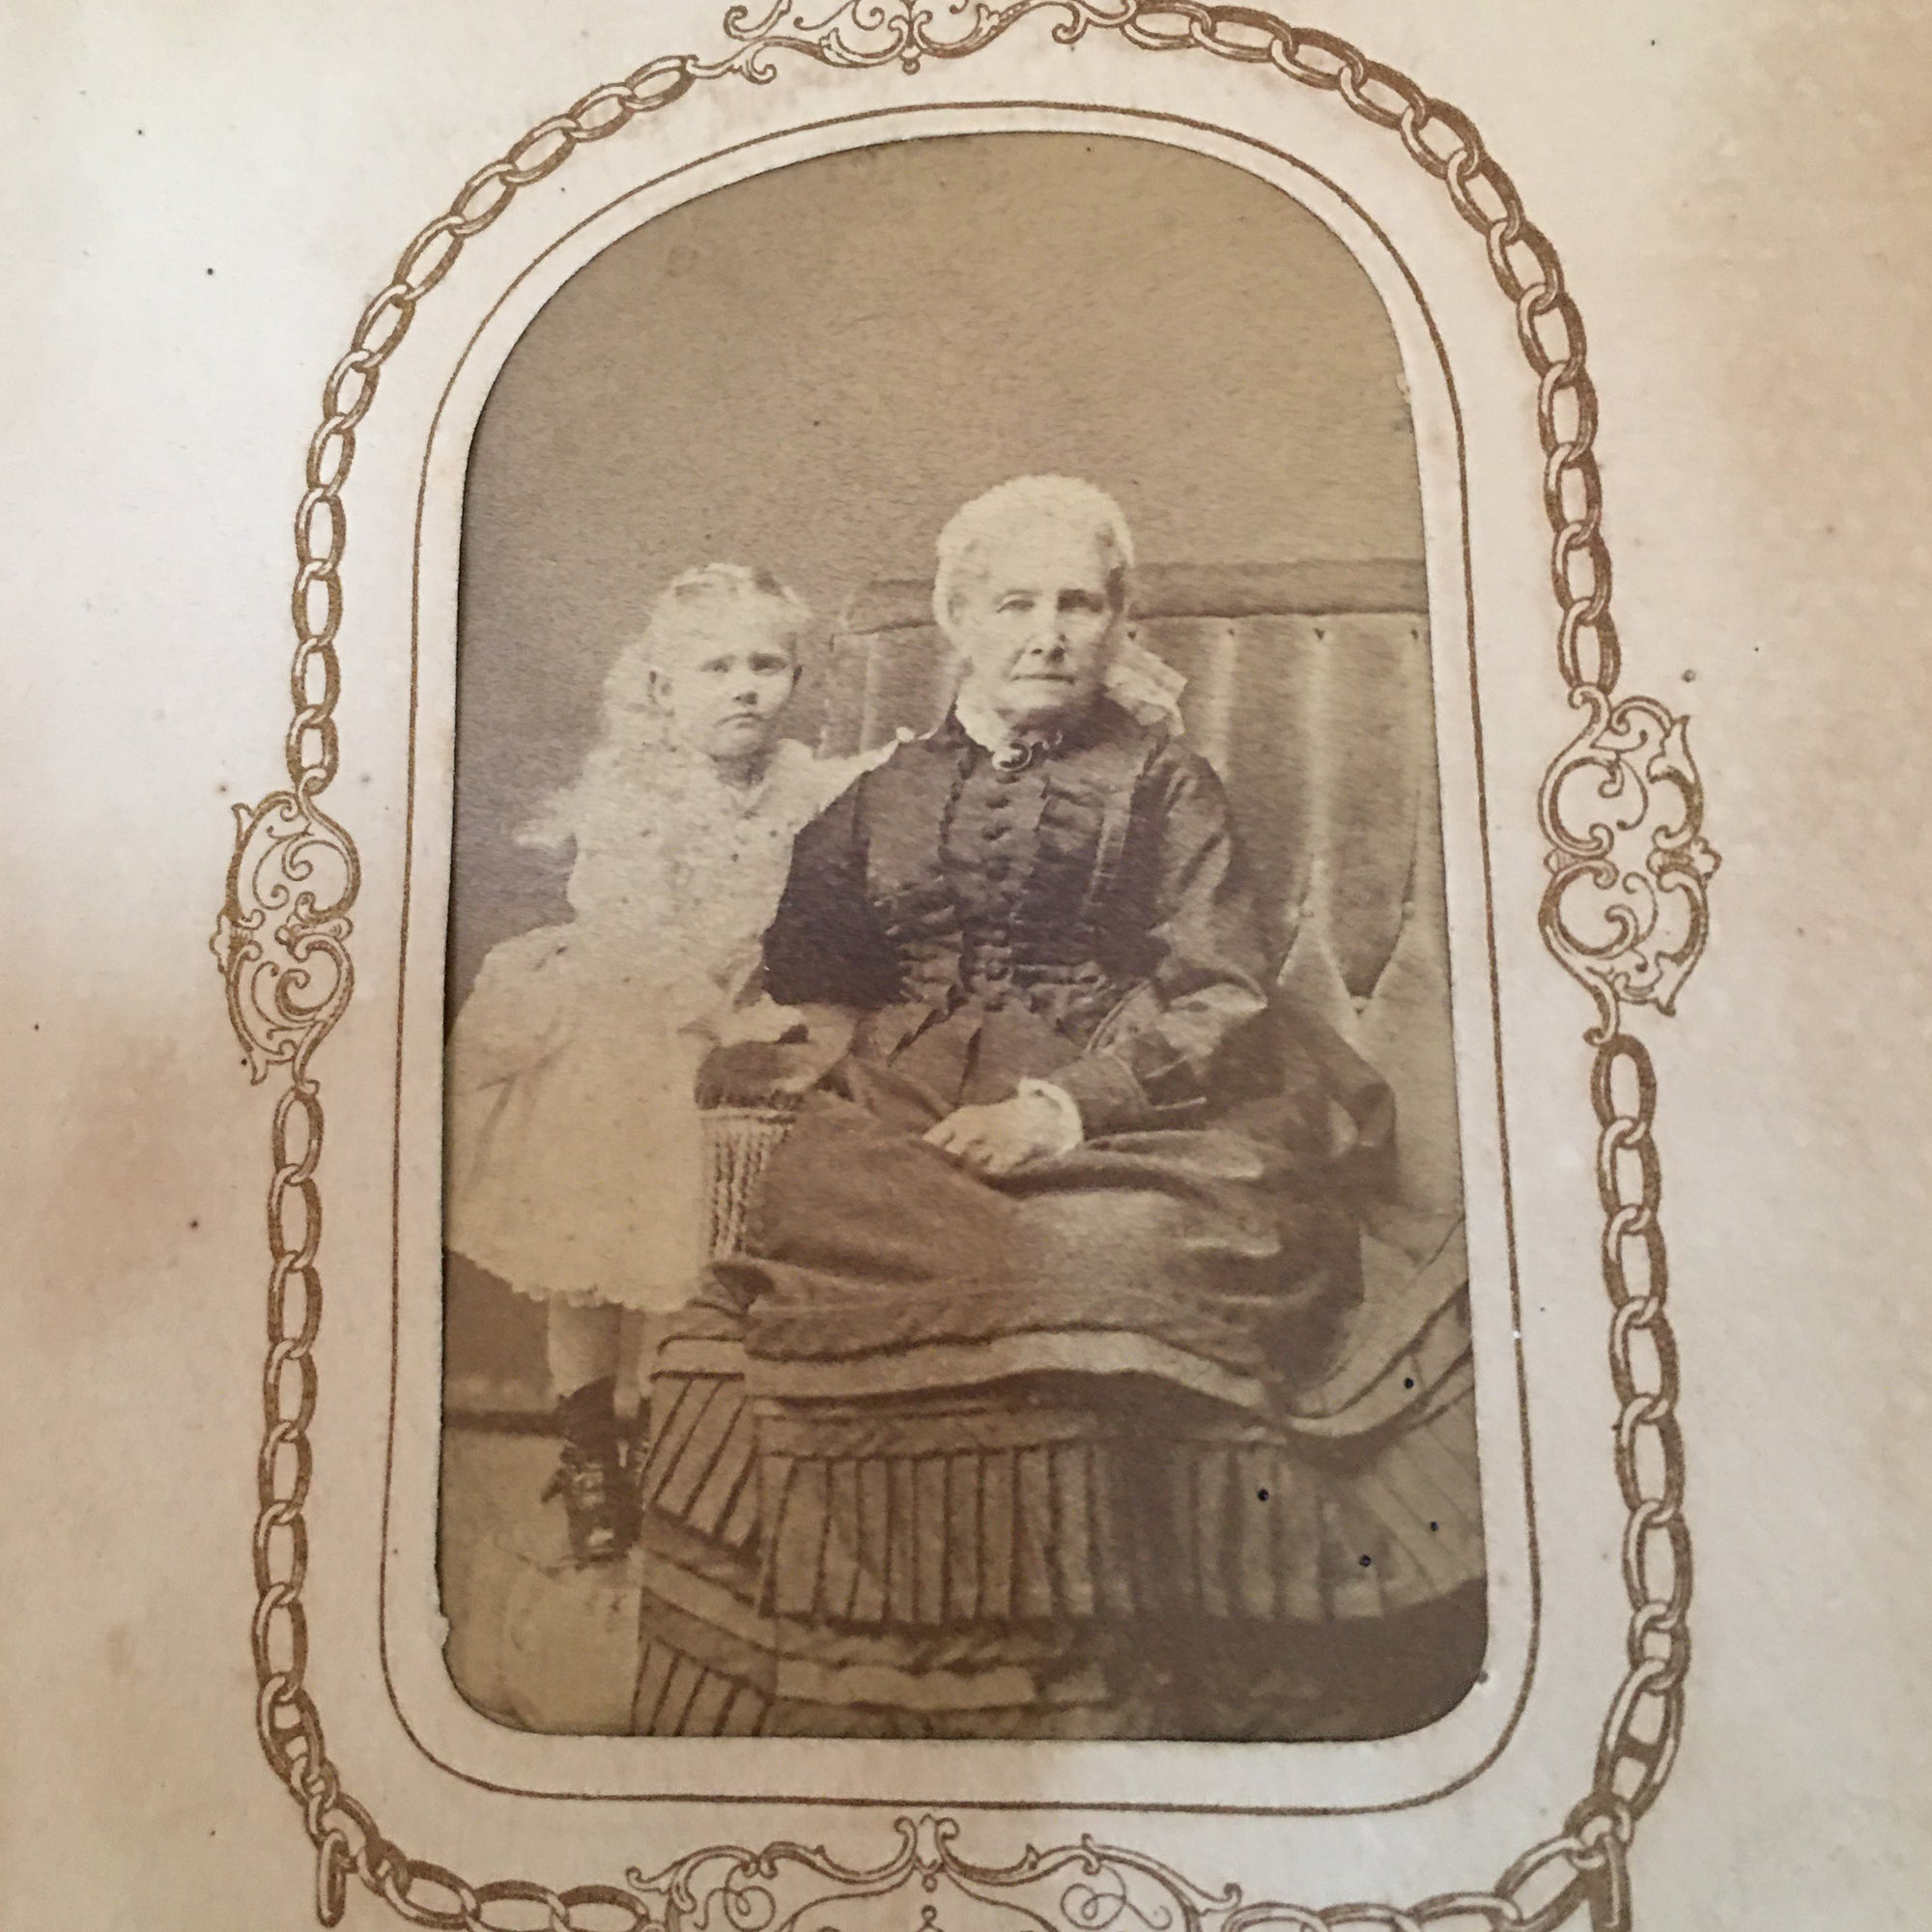 Civil War Era Photo Album, with Photos and Tintypes, Leather with Brass Clasps, Including Wedding Photo of Tom Thumb